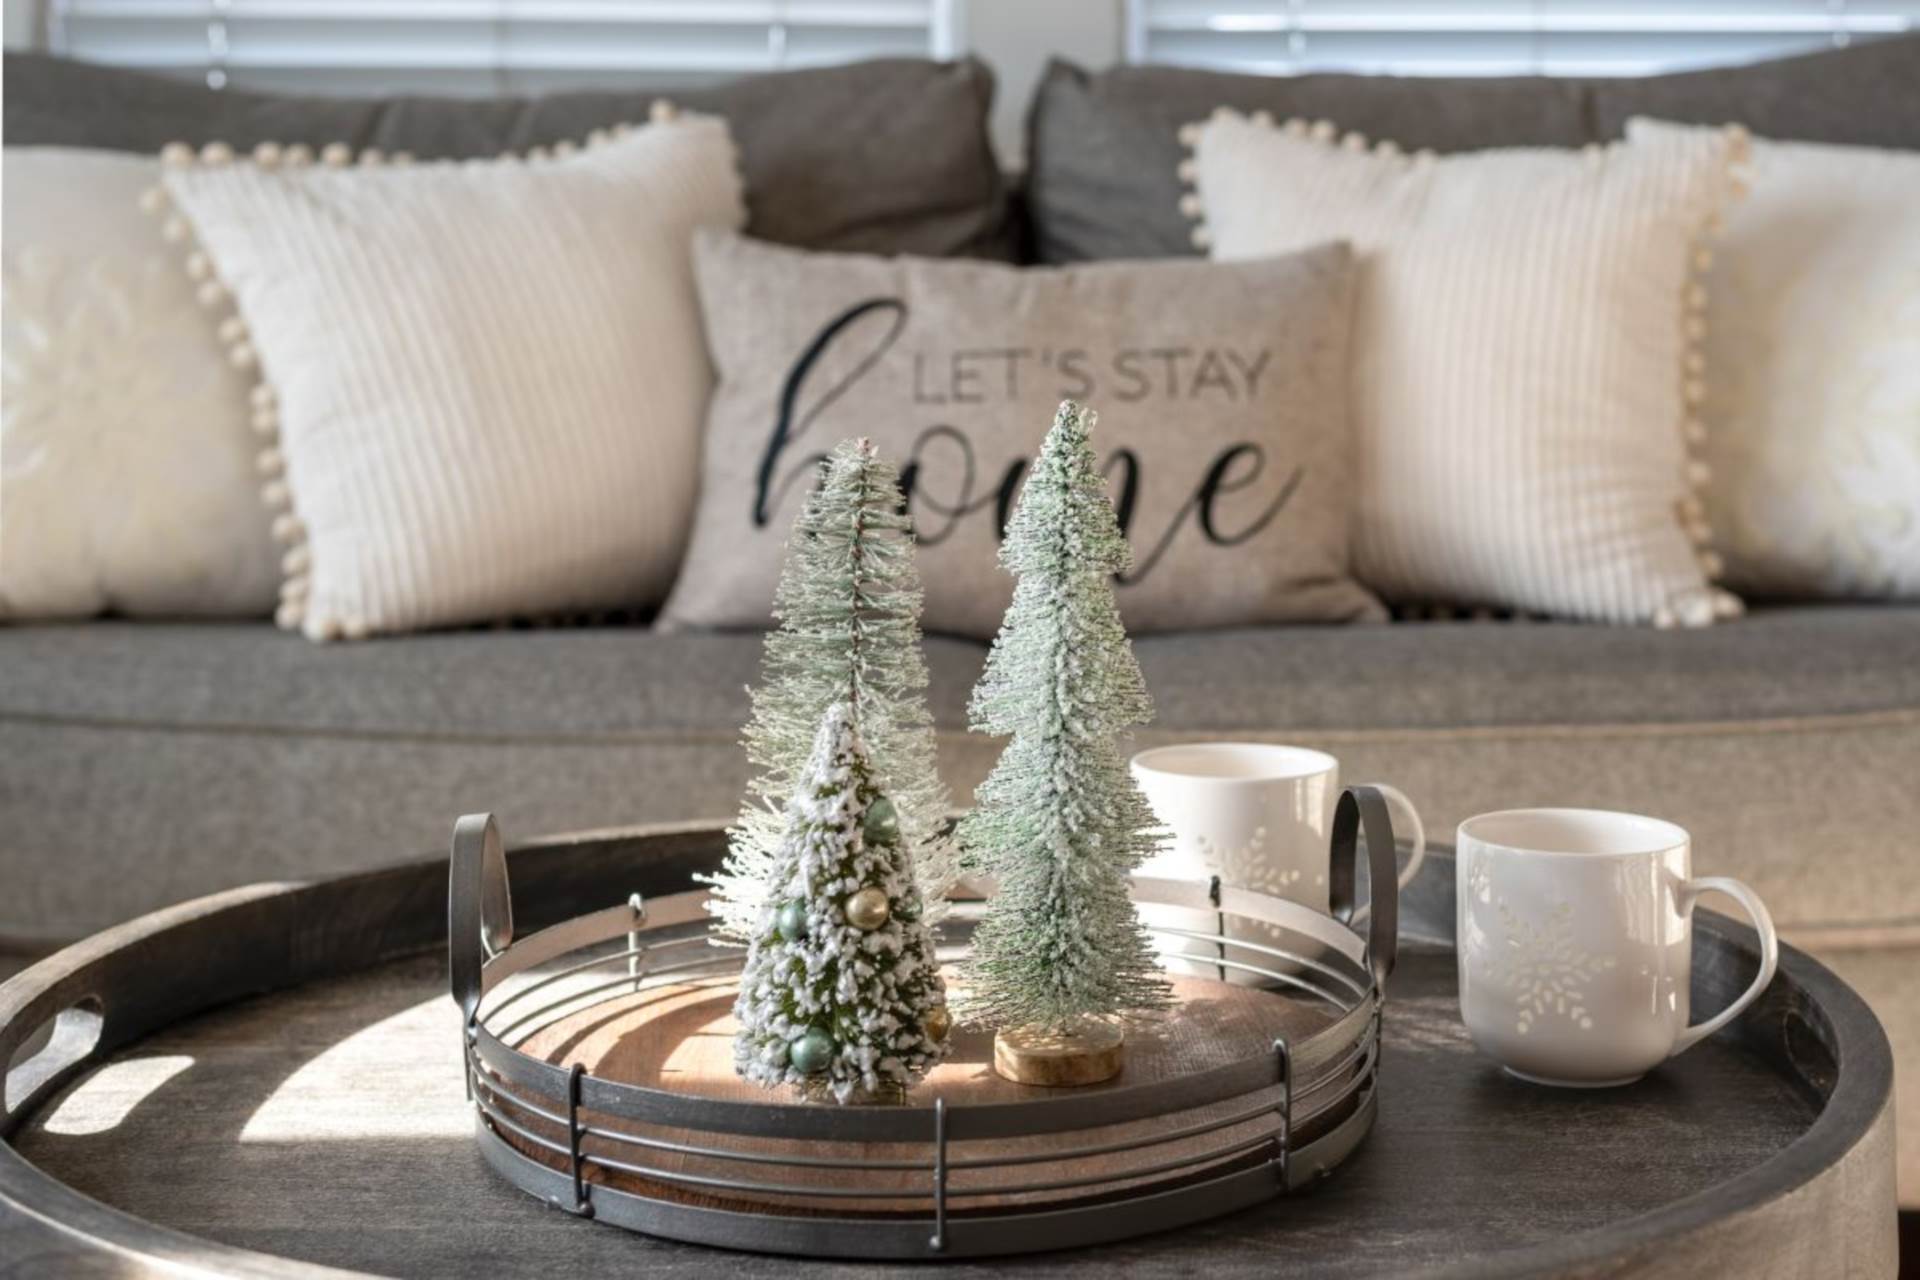 Deposit friendly decorations for your home